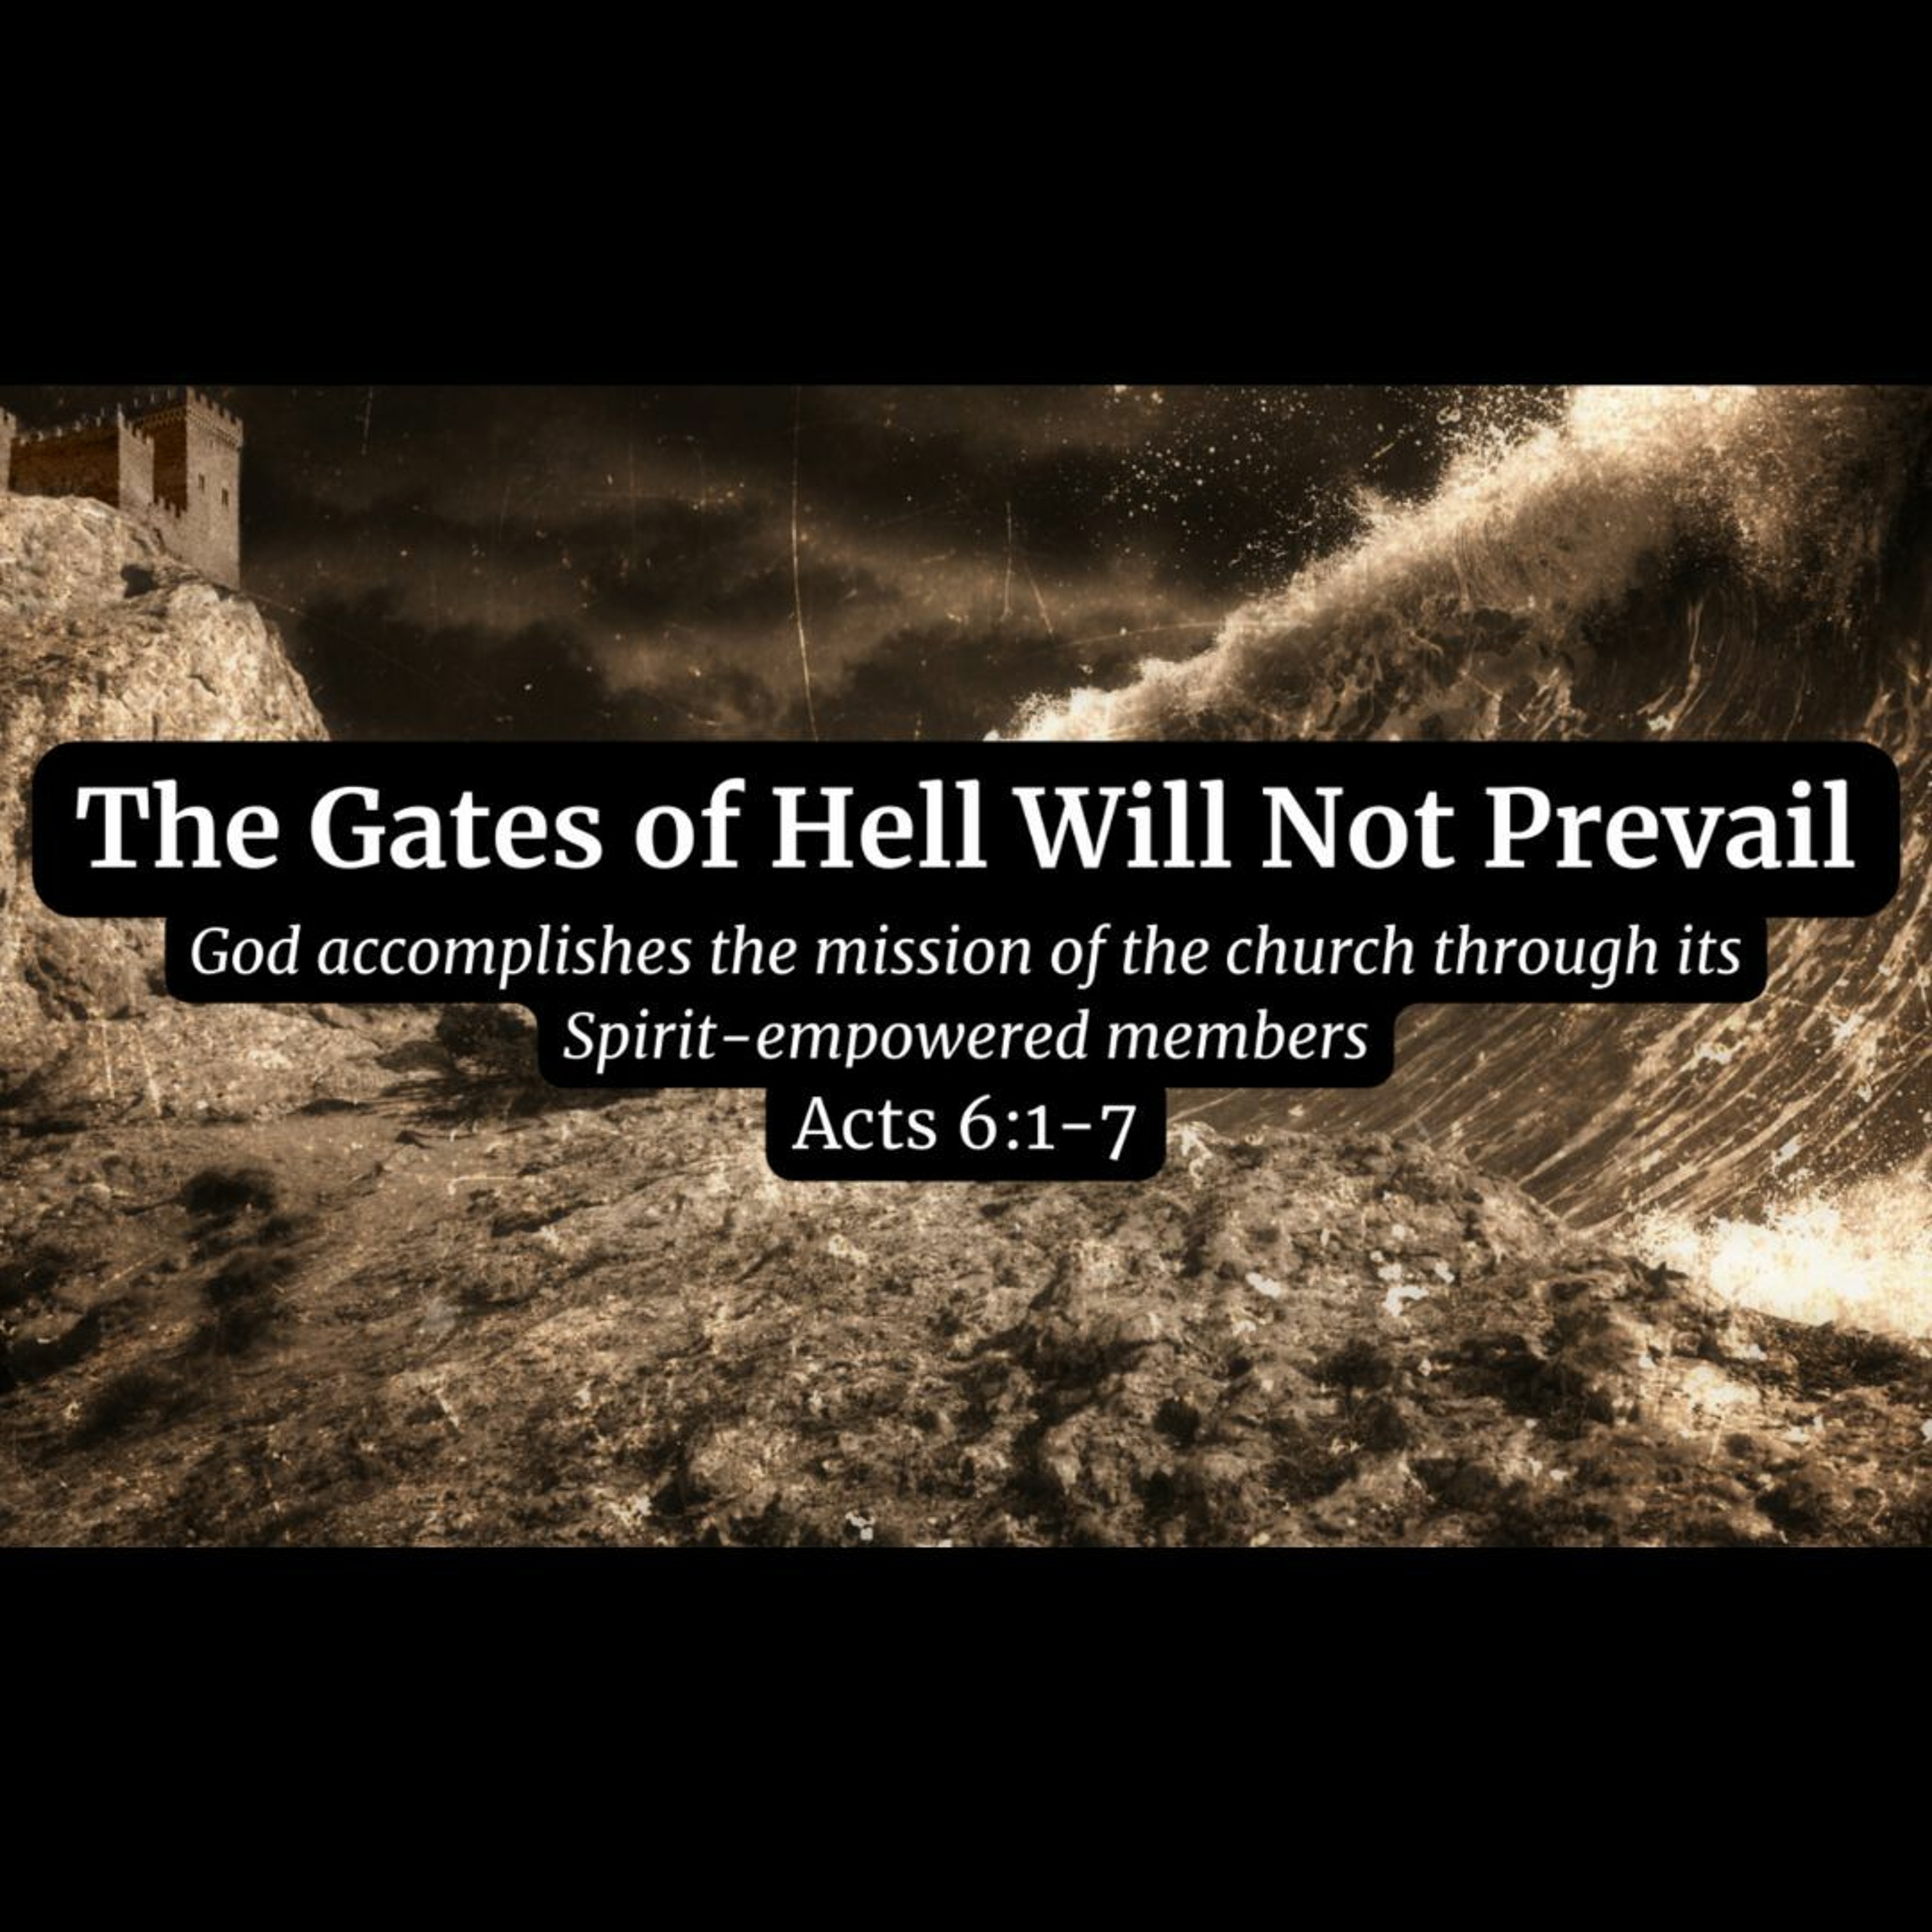 The Gates of Hell Will Not Prevail (Acts 6:1-7)